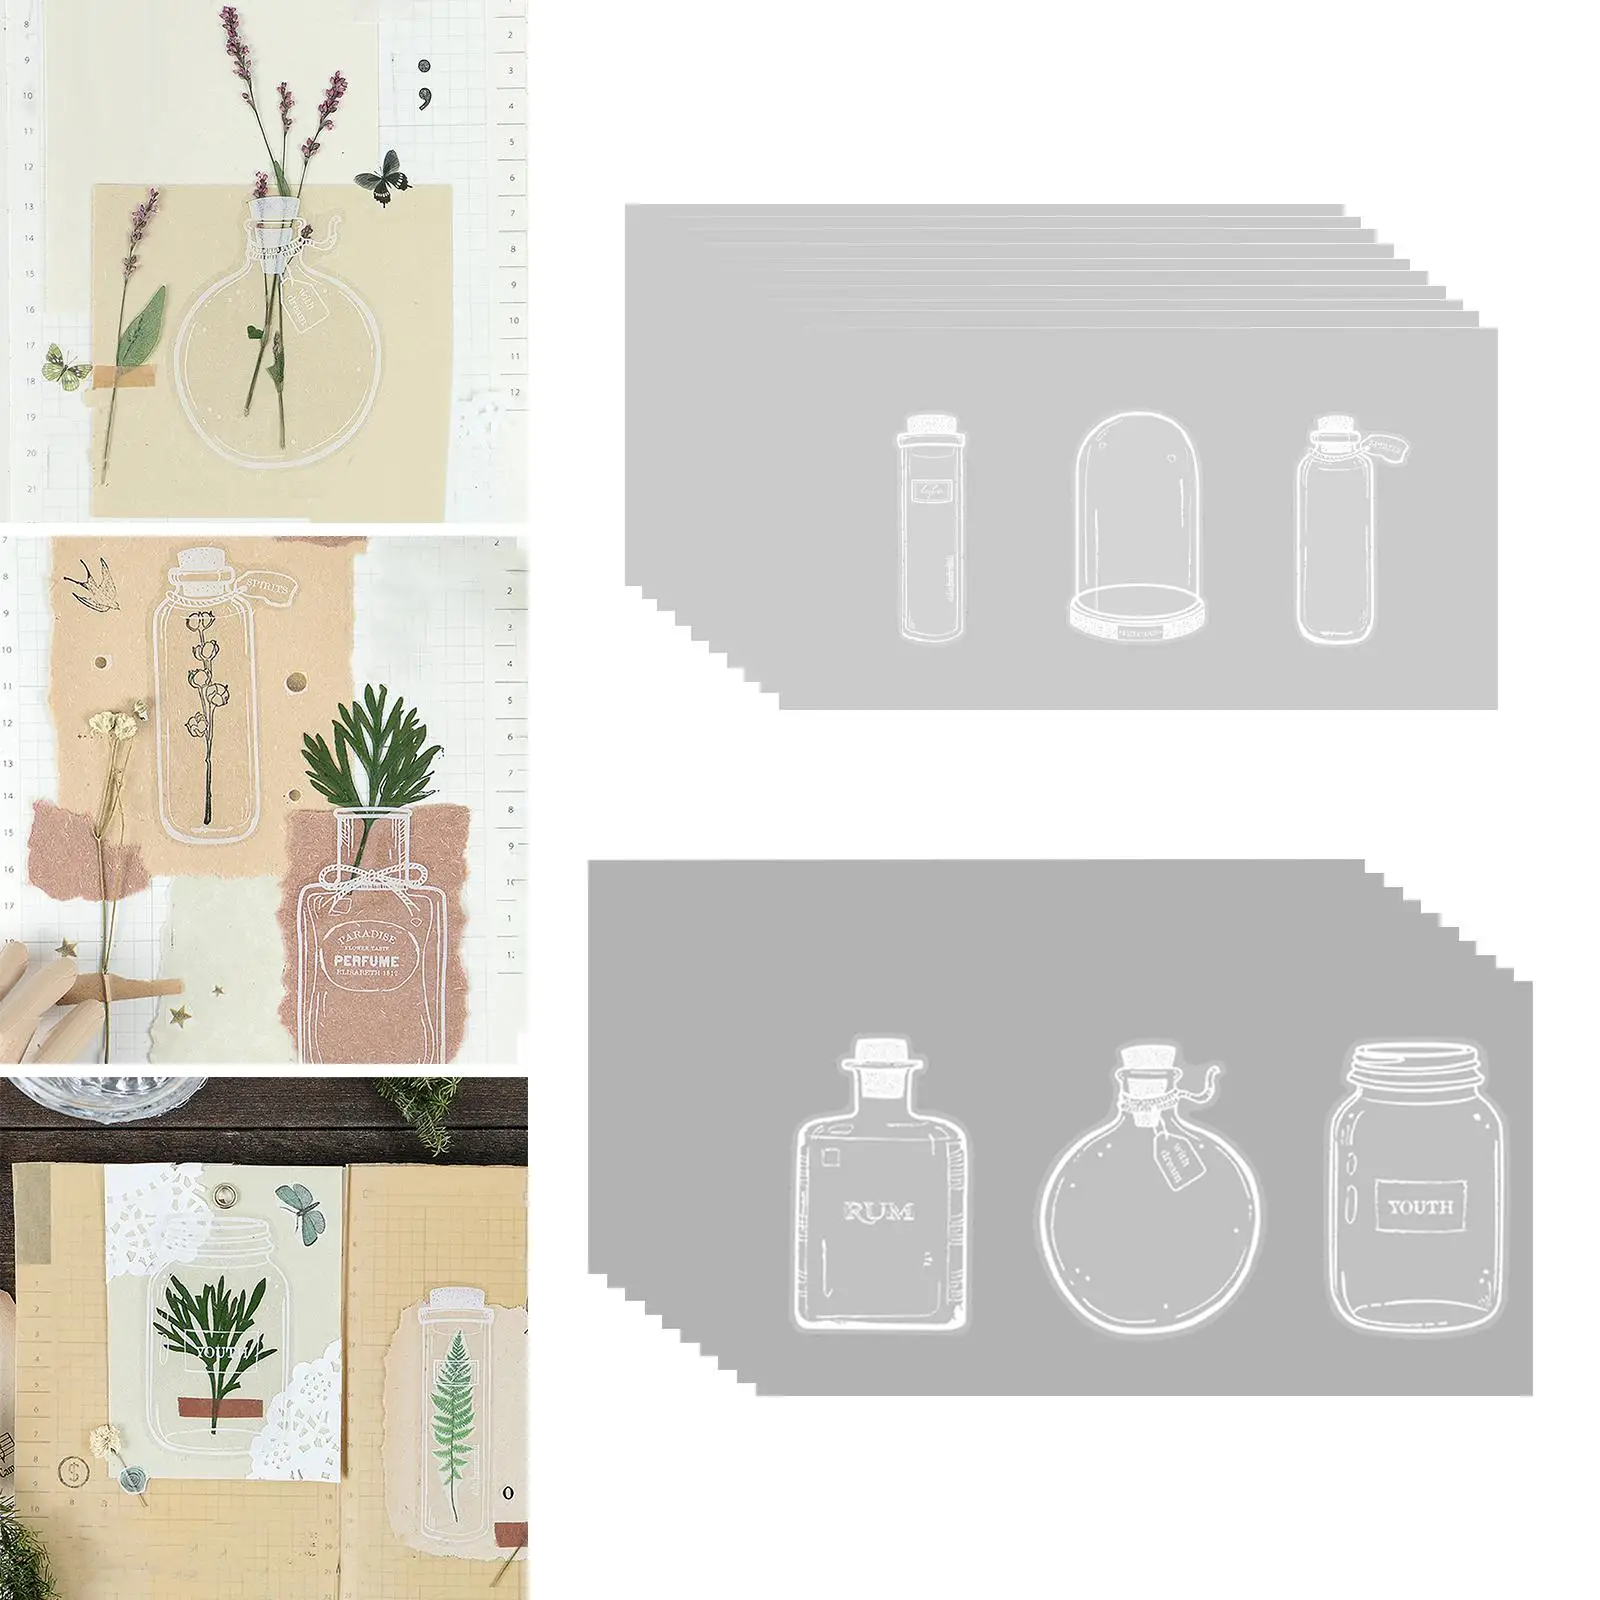 Transparent Glassware Jar Bottle Shape Stickers Paper Note Stickers Container Scrapbook Stickers for Notebook Laptops DIY Craft